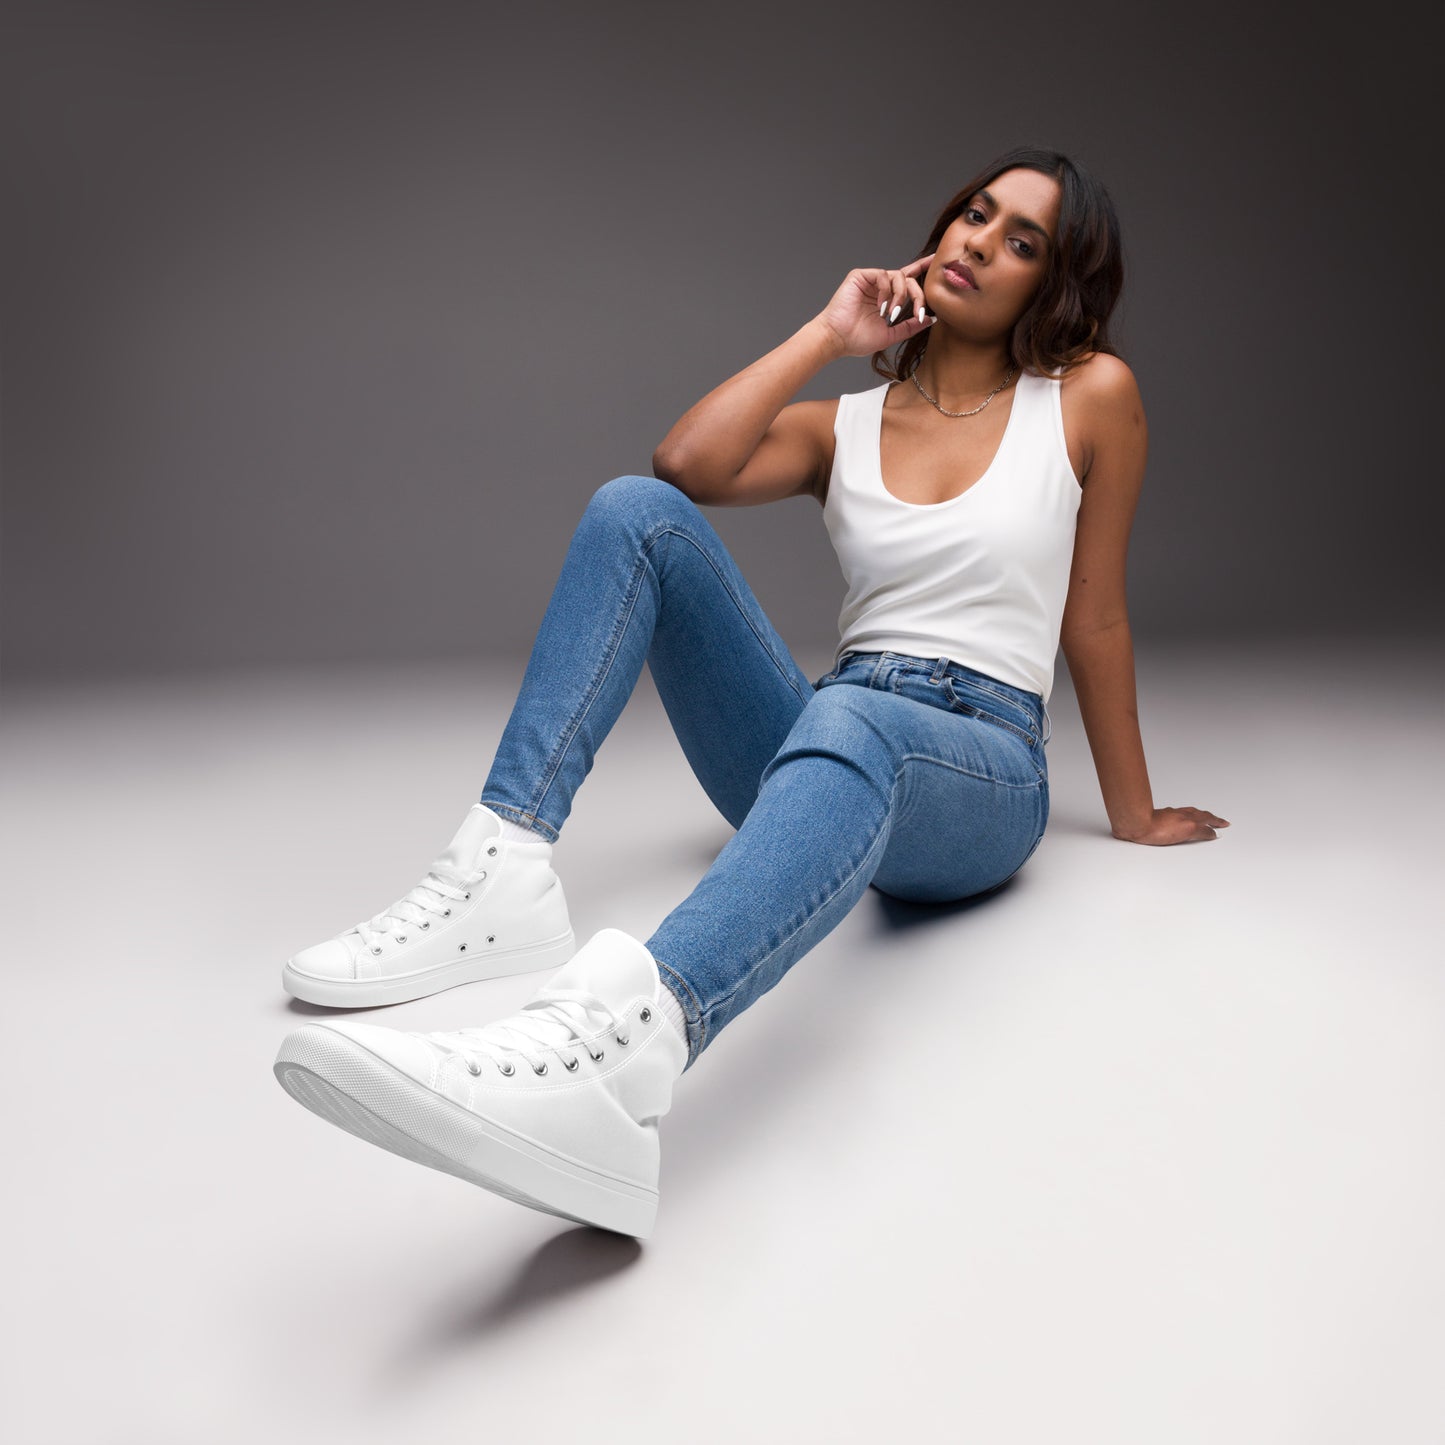 Women’s White high top canvas shoes